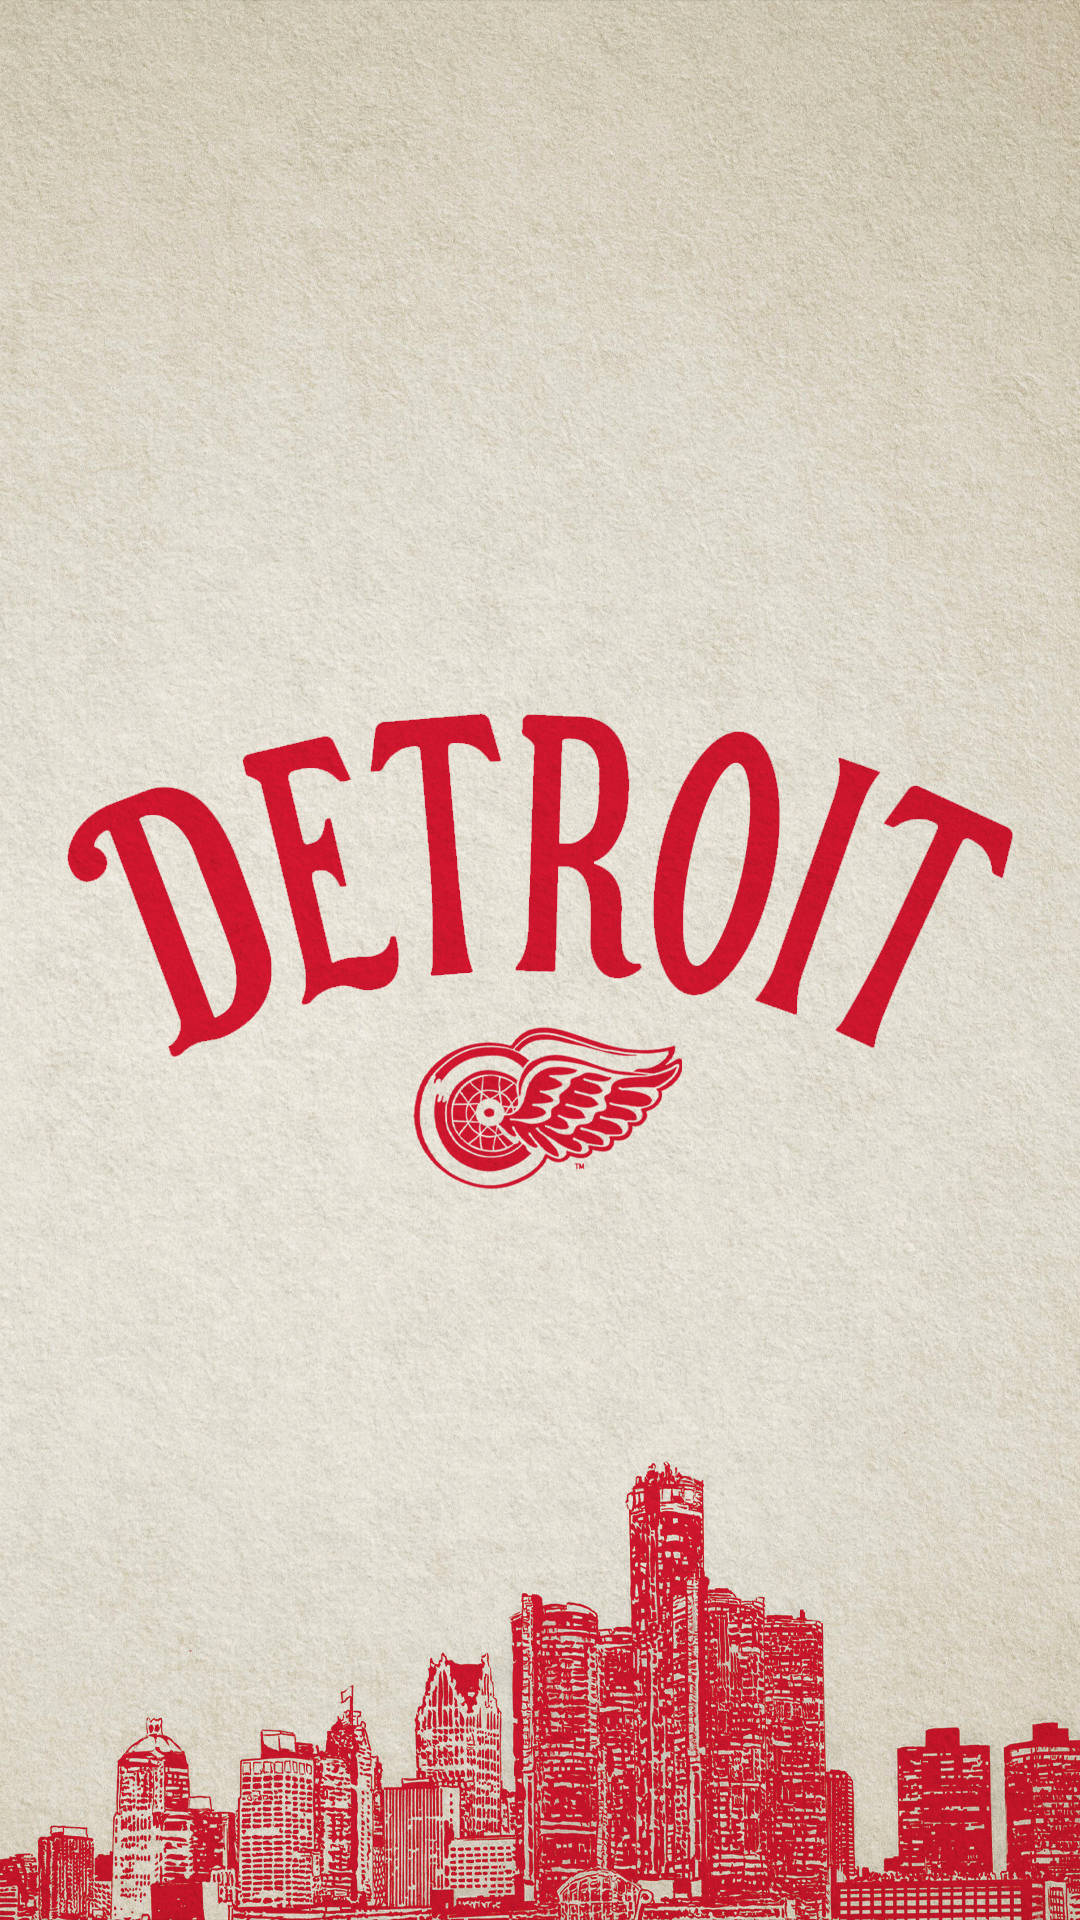 Caption: A Vibrant Cityscape Infused With Detroit Red Wings Spirit Wallpaper